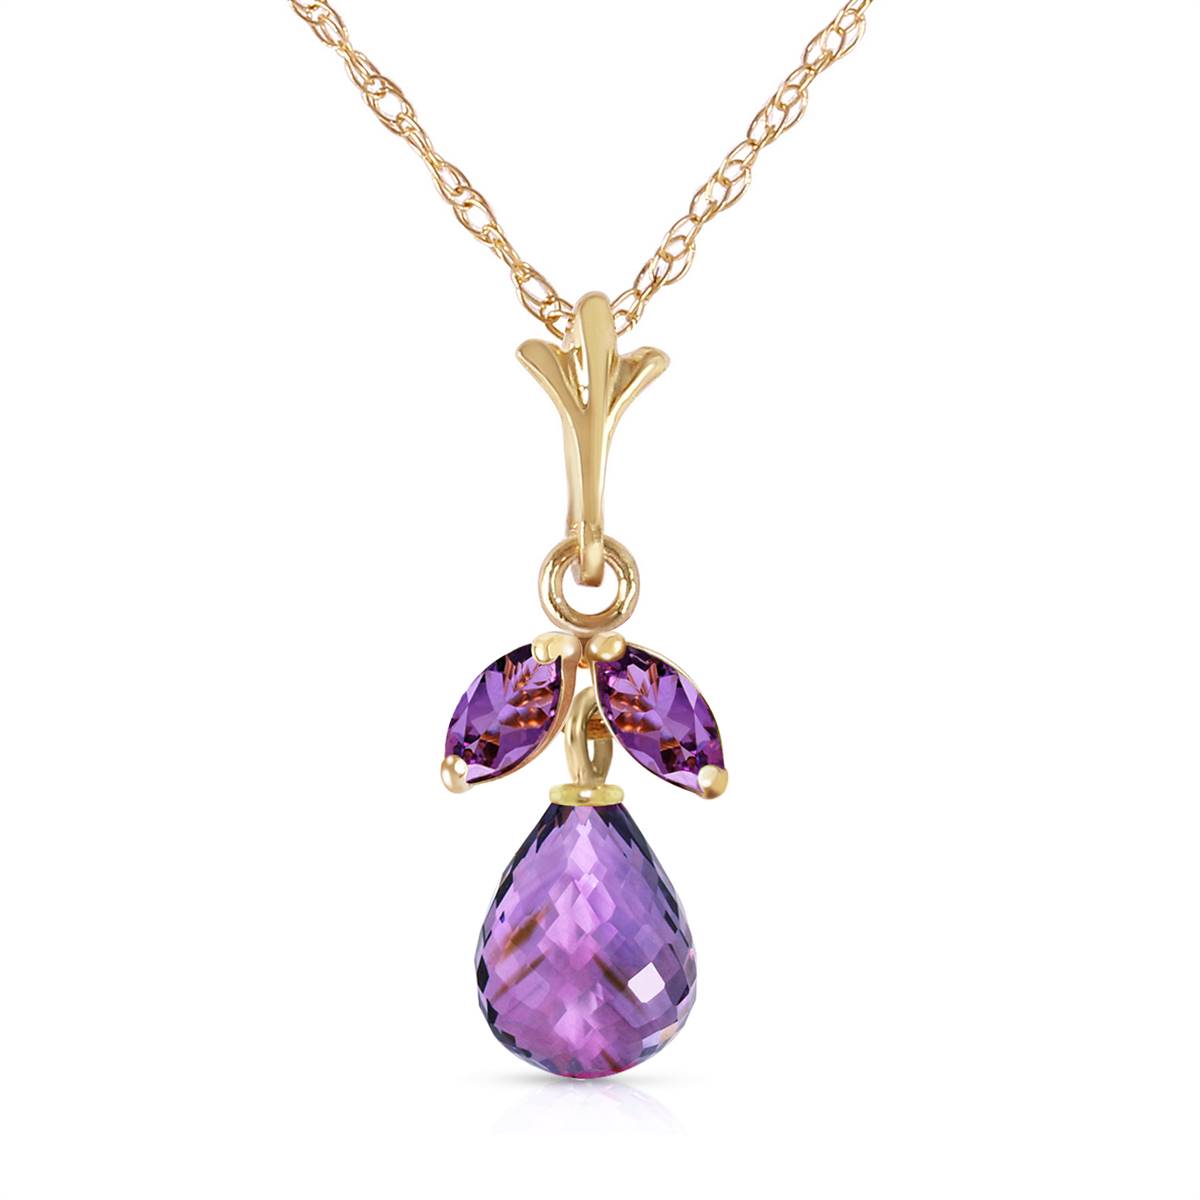 1.7 Carat 14K Solid Yellow Gold Ease Into Love Amethyst Necklace